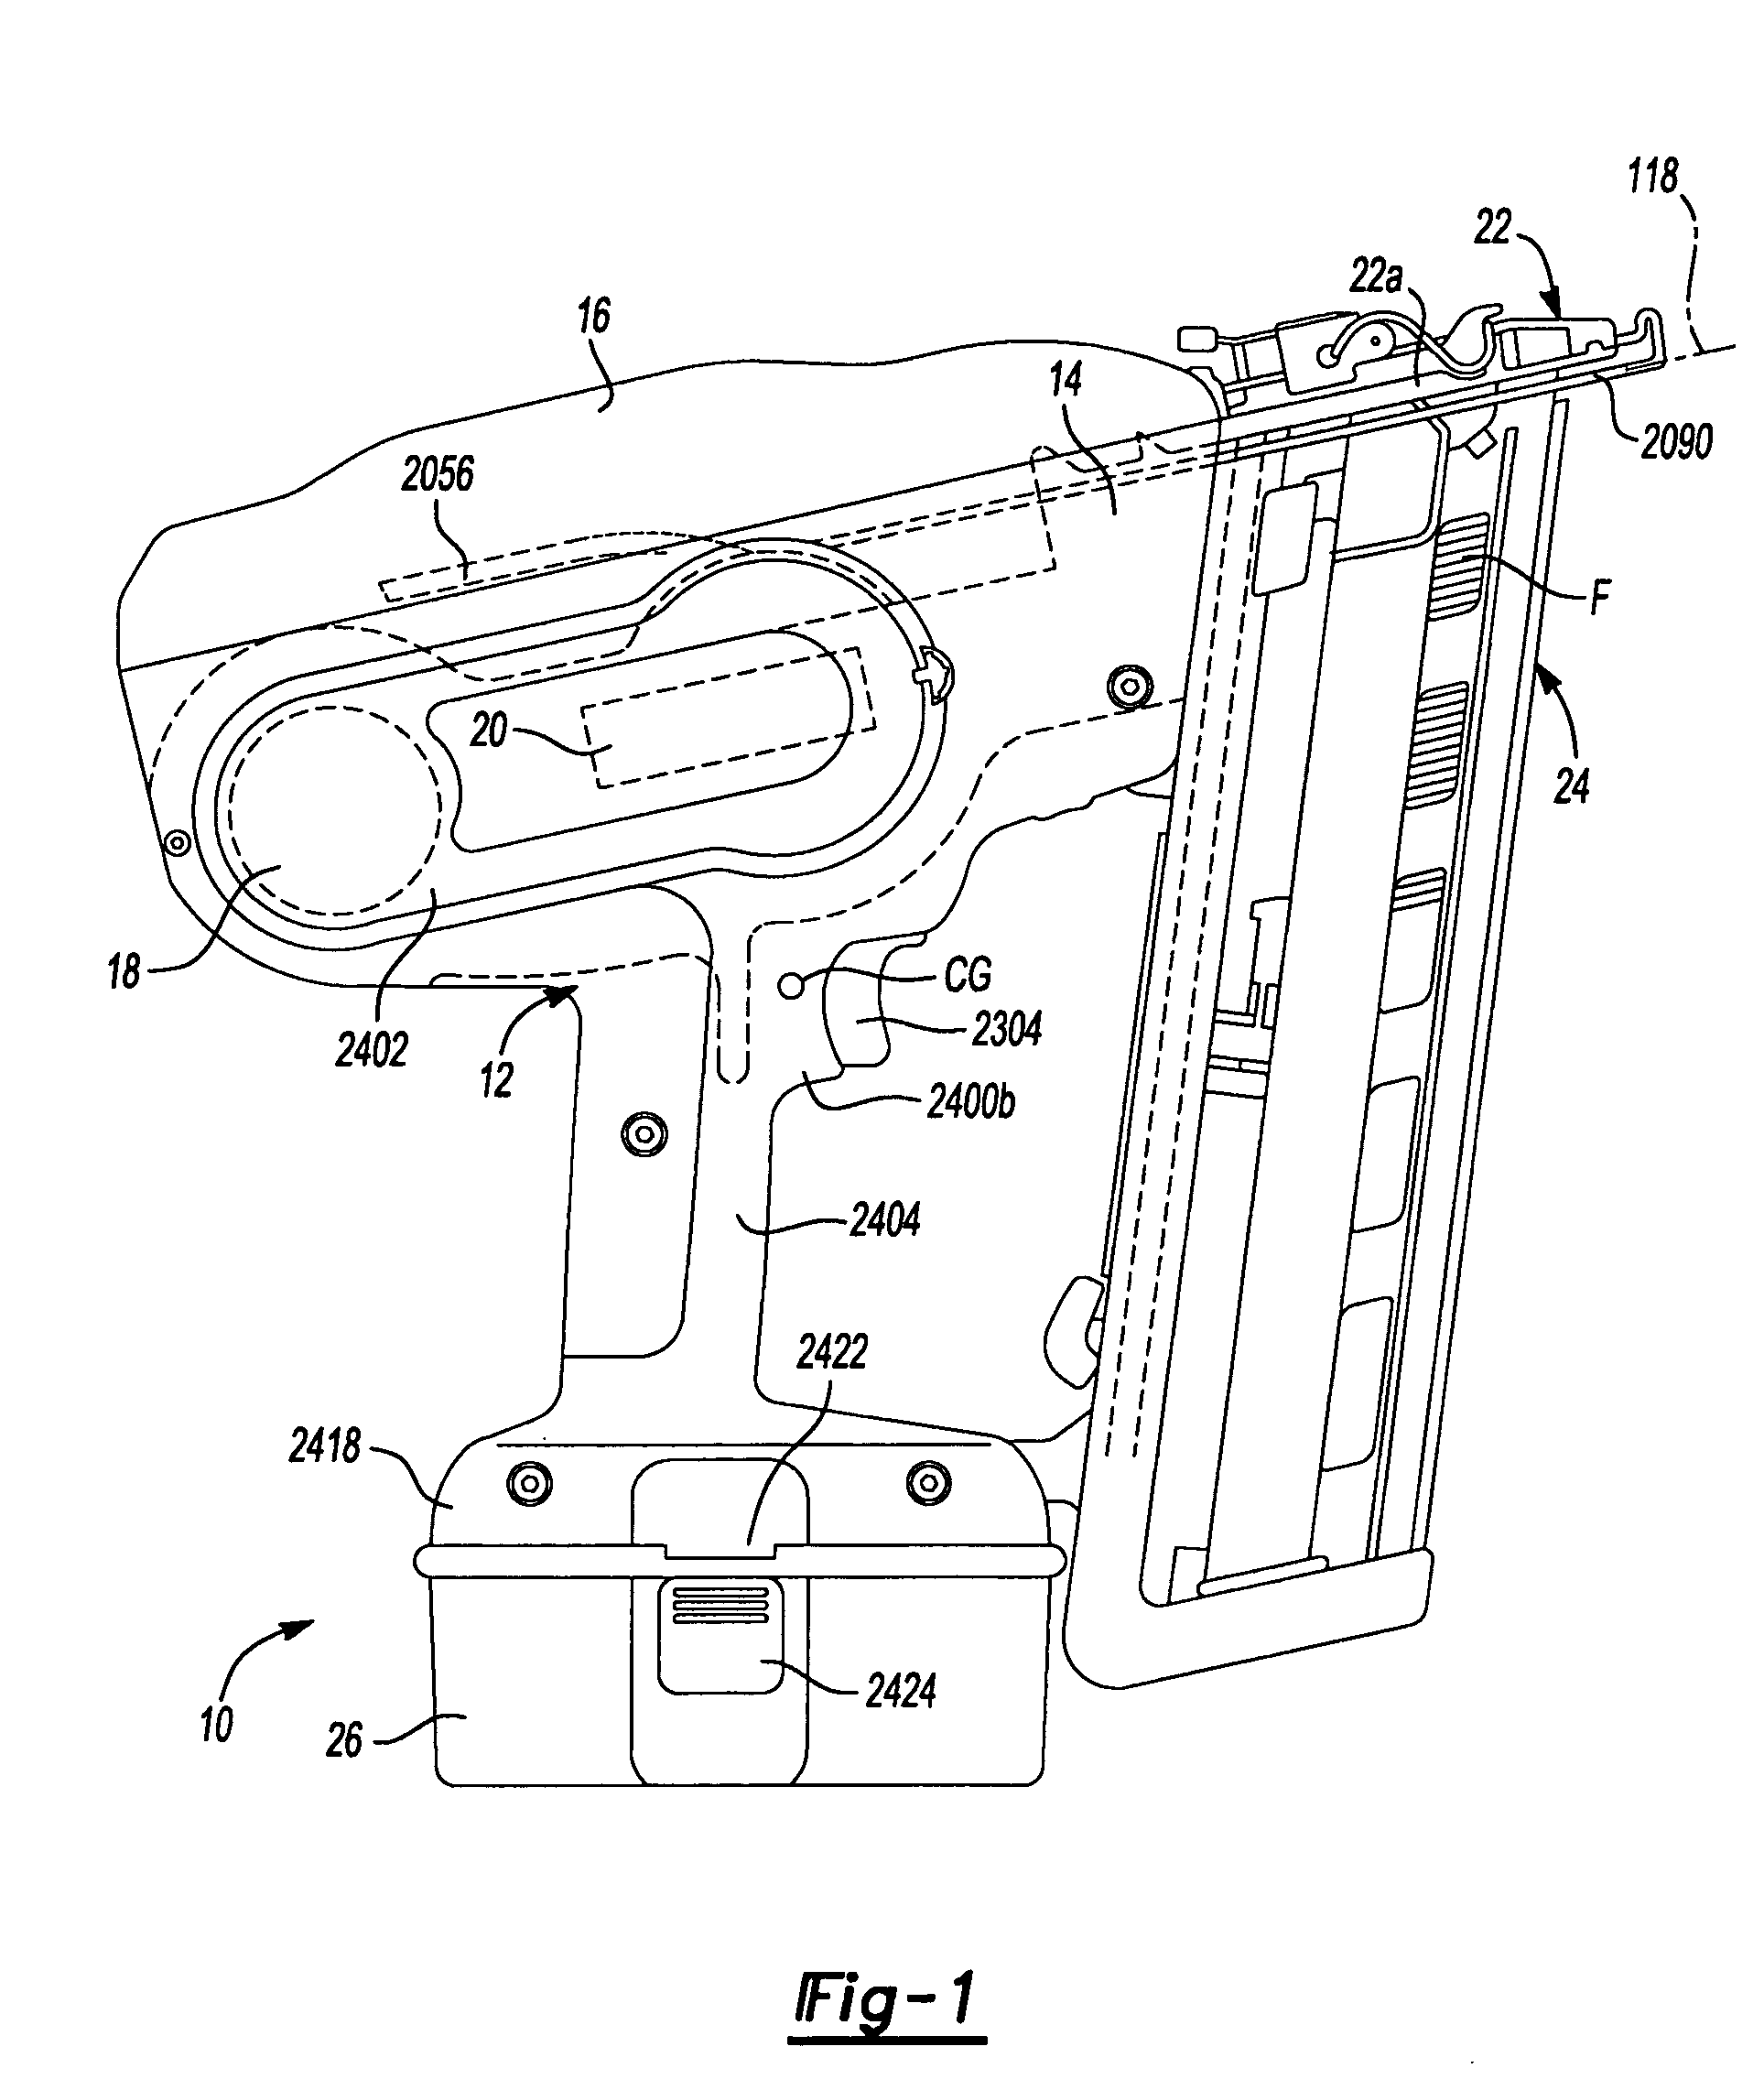 Electric driving tool with driver propelled by flywheel inertia